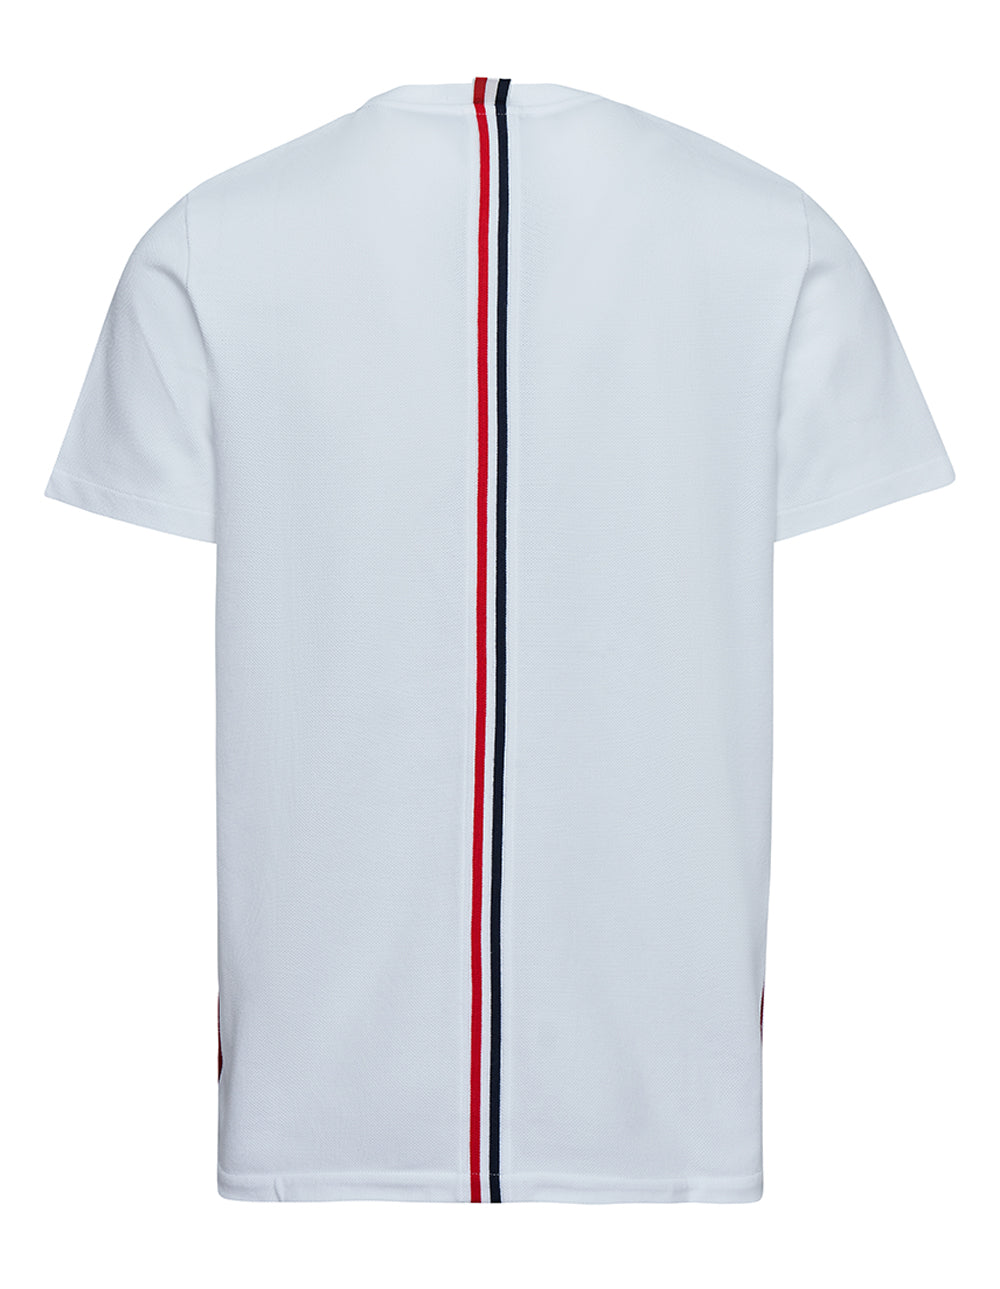 Thom Browne Relaxed Fit Tee White 2